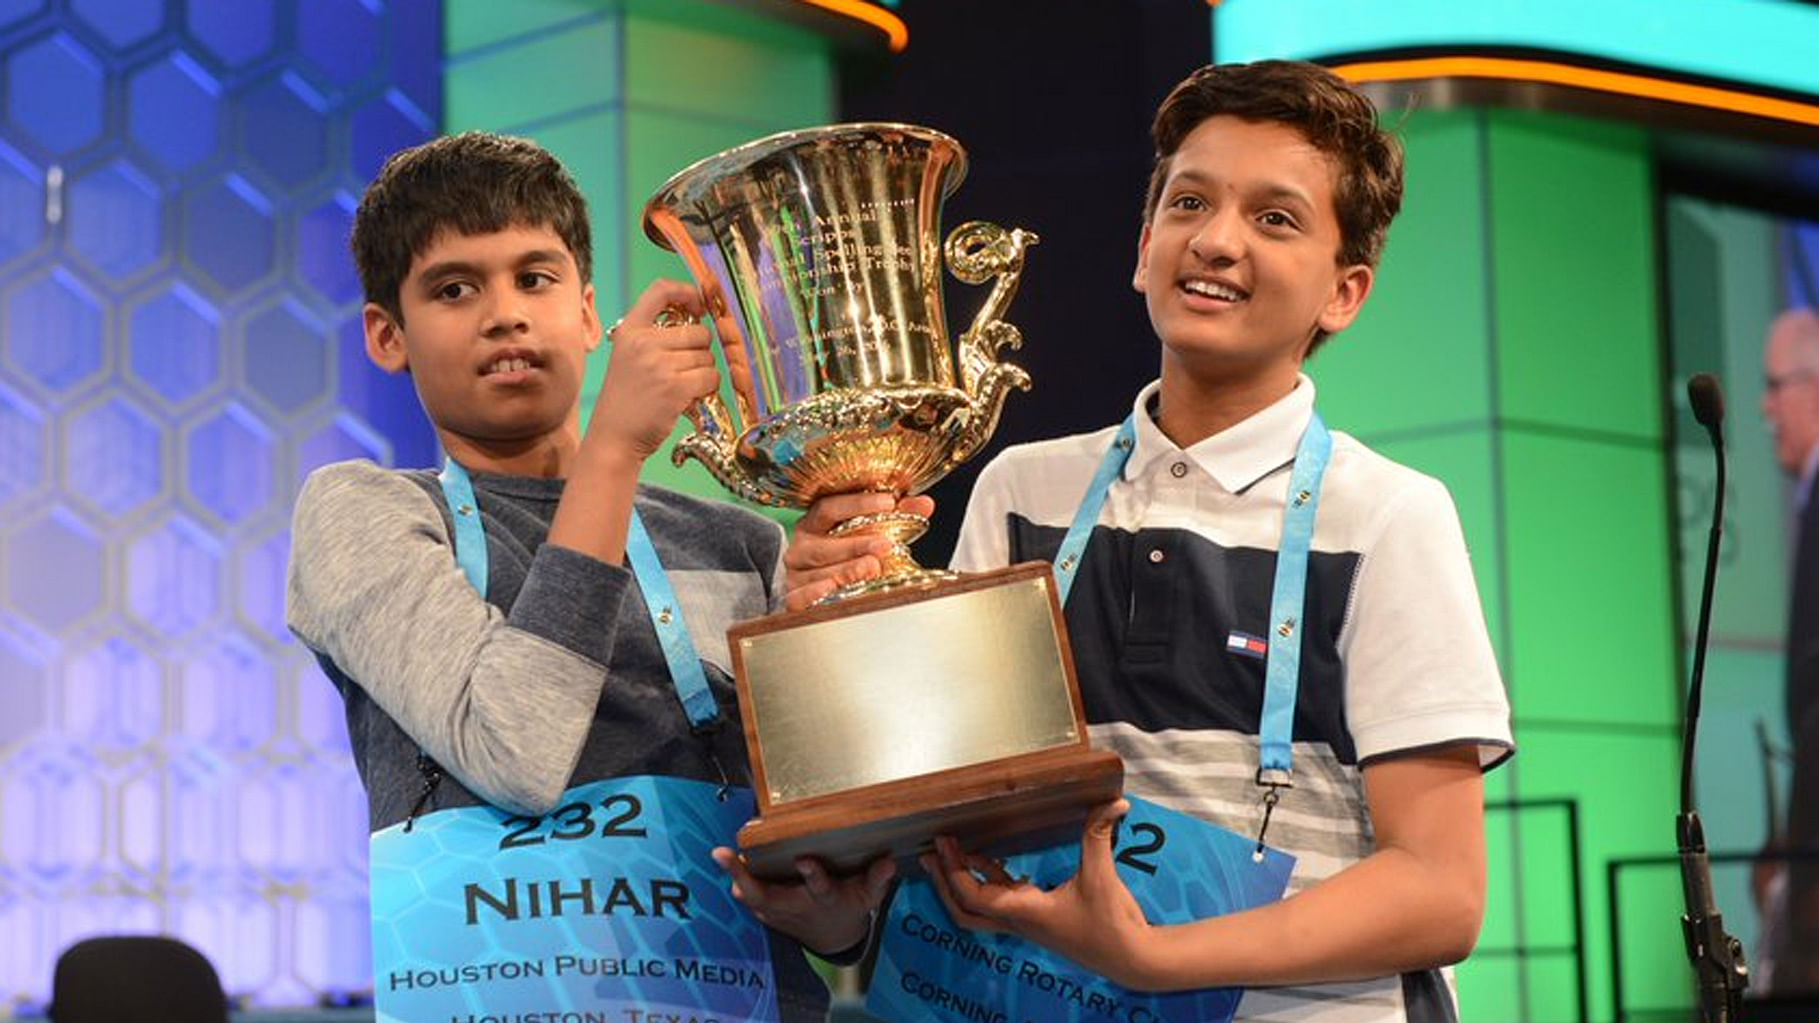 Nihar Janga (left) and Jairam Hathwar (right), joint winners of the 2016 edition of the Scripps National Spelling Bee, in Oxon Hill, USA. (Photo: AP/ESPN screengrab)